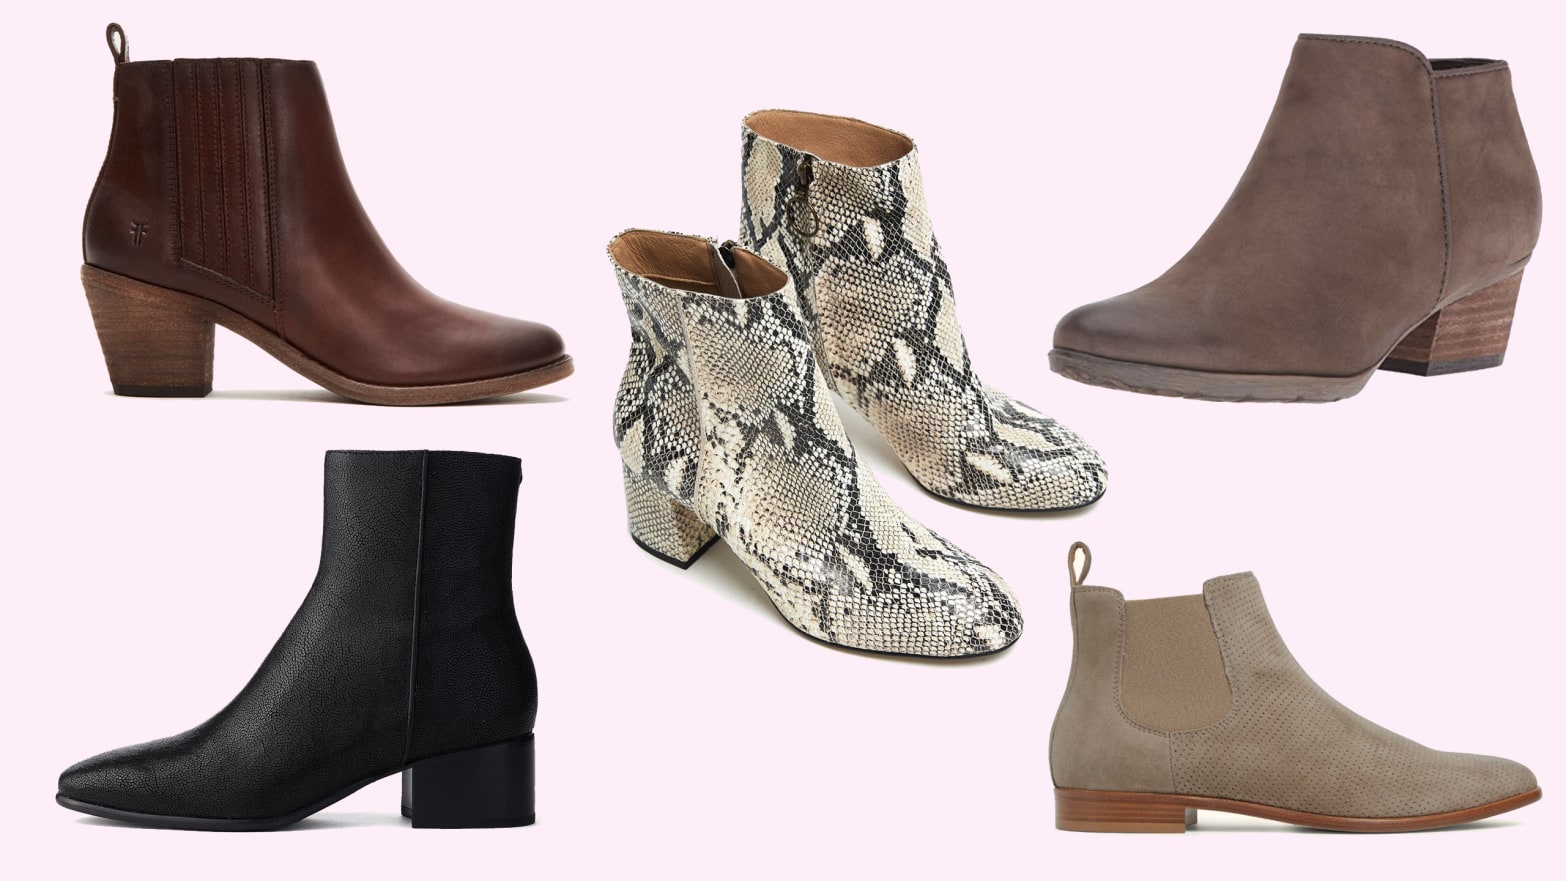 How to Wear Ankle Boots with Skirts and Dresses This Fall